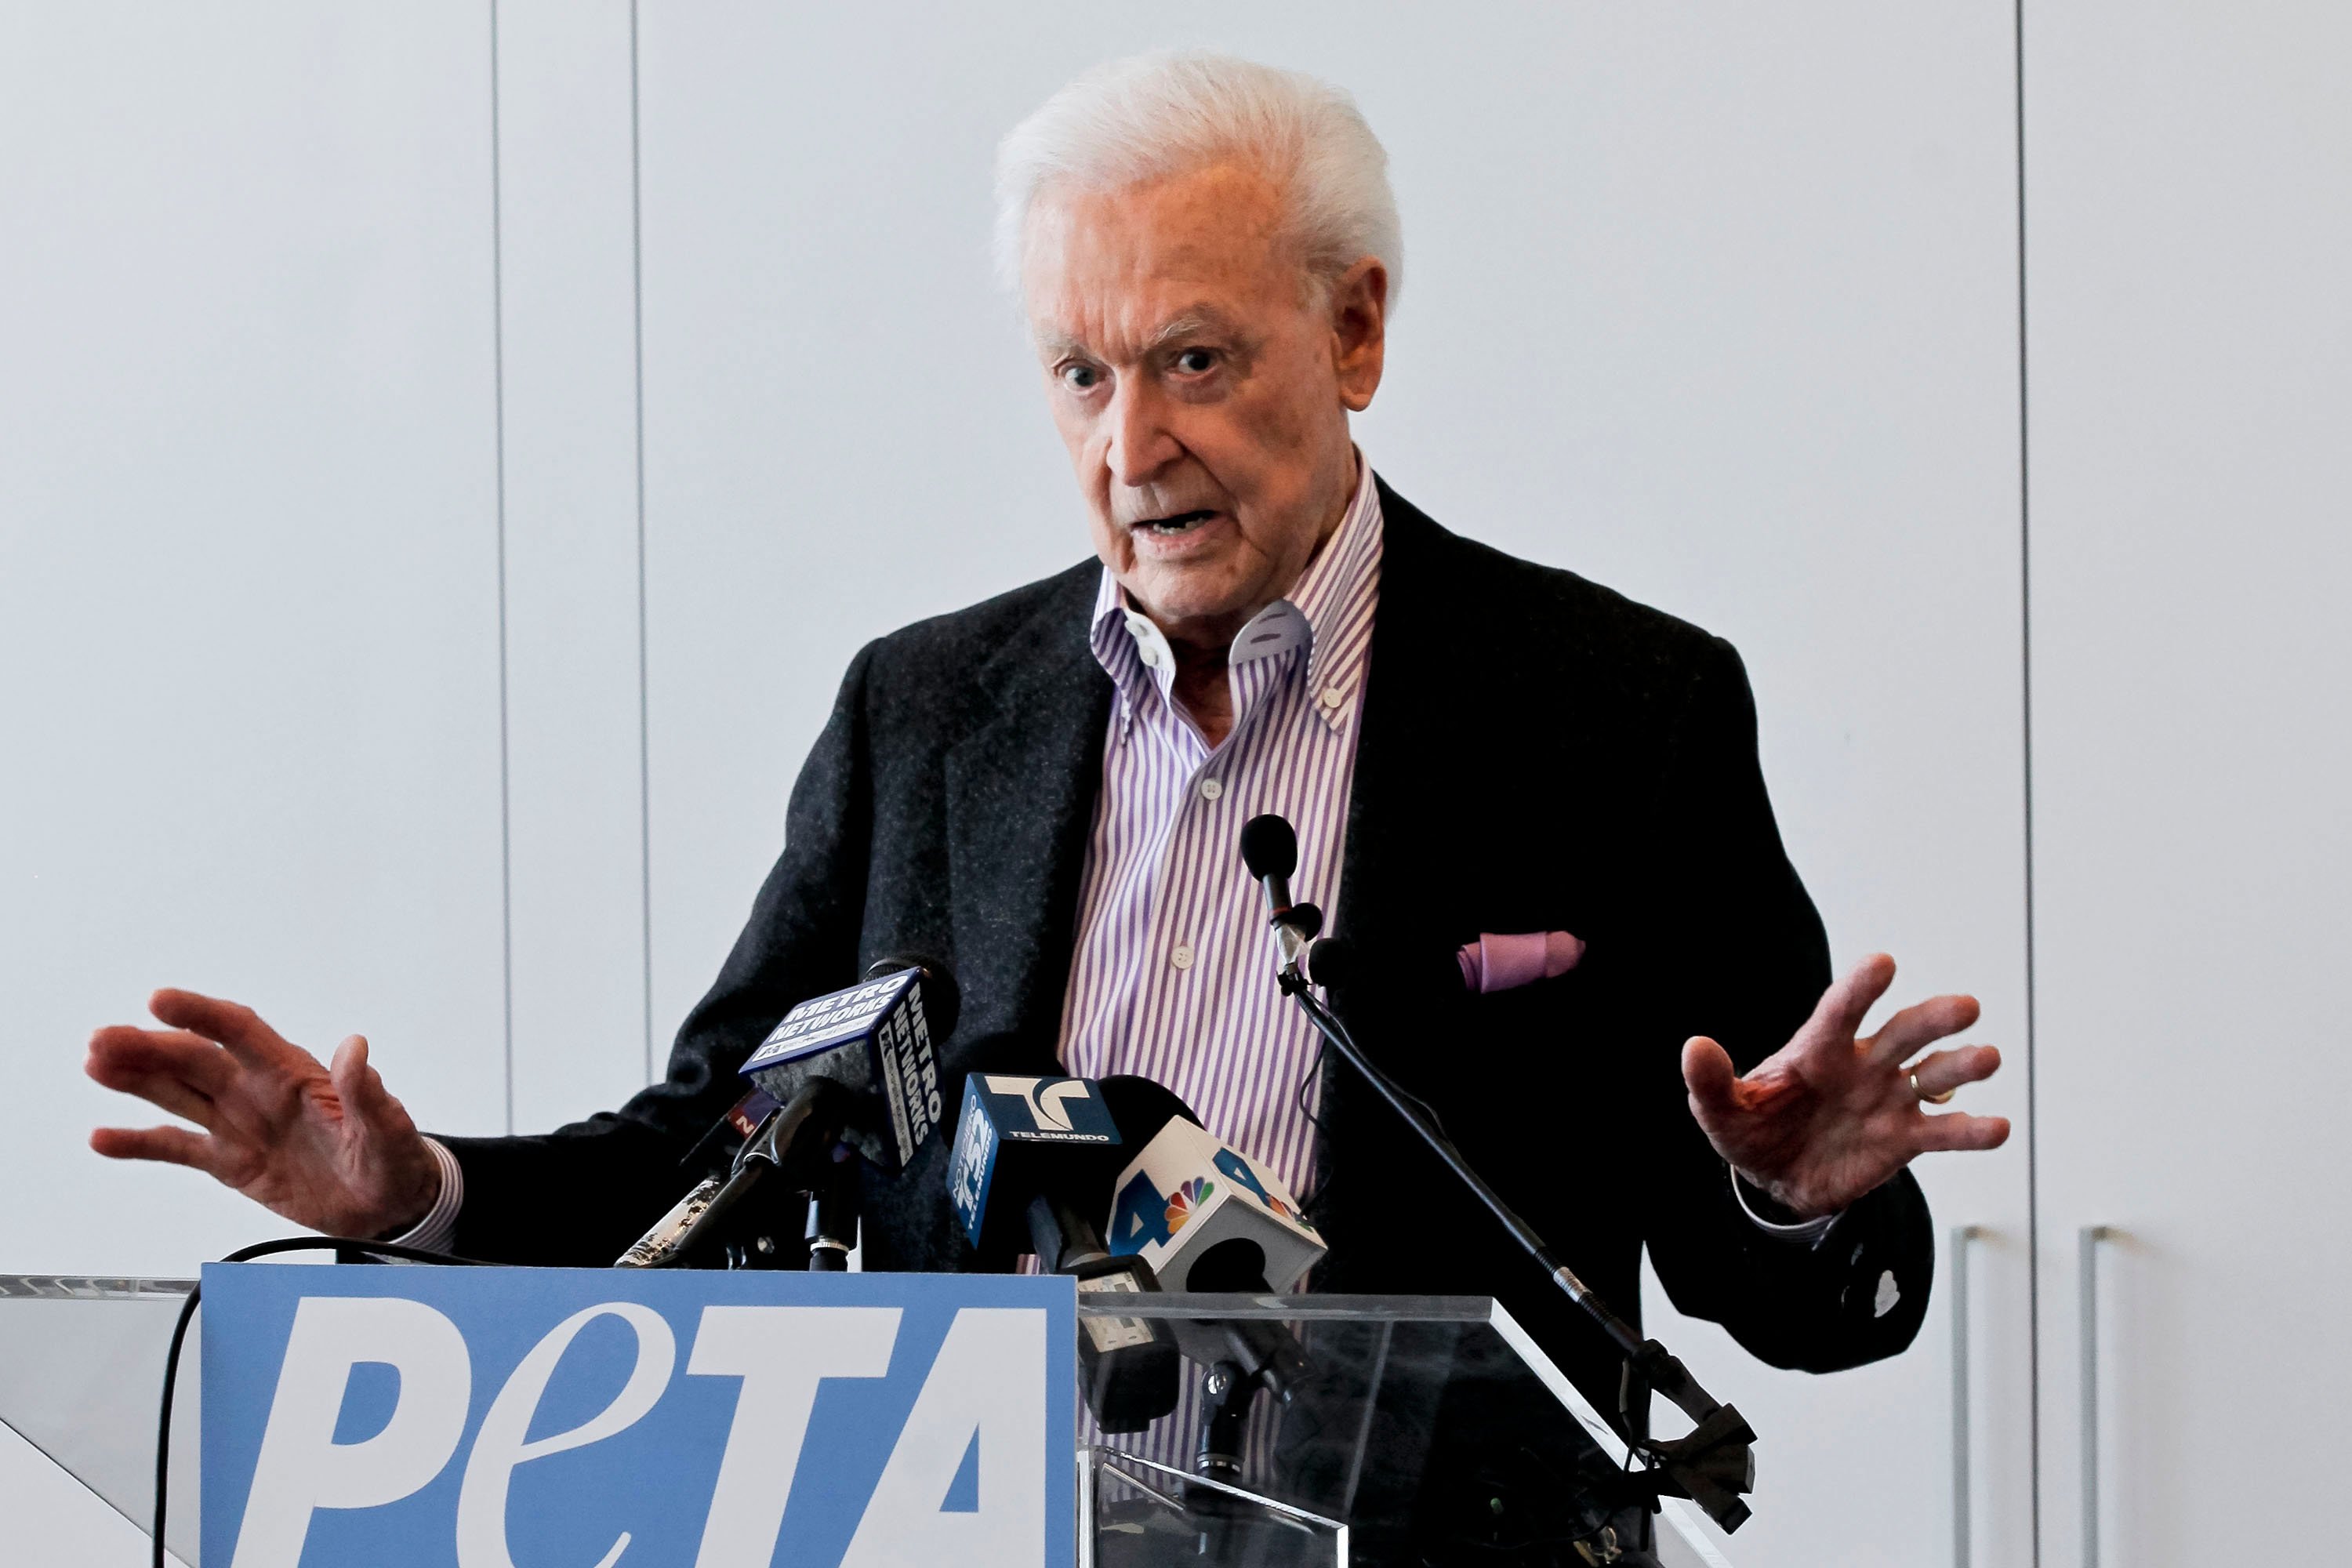 Bob Barker at press conference to reform 'No Animals Harmed' movie label at The Bob Barker Building on September 13, 2012 in Los Angeles, California | Source: Getty Images